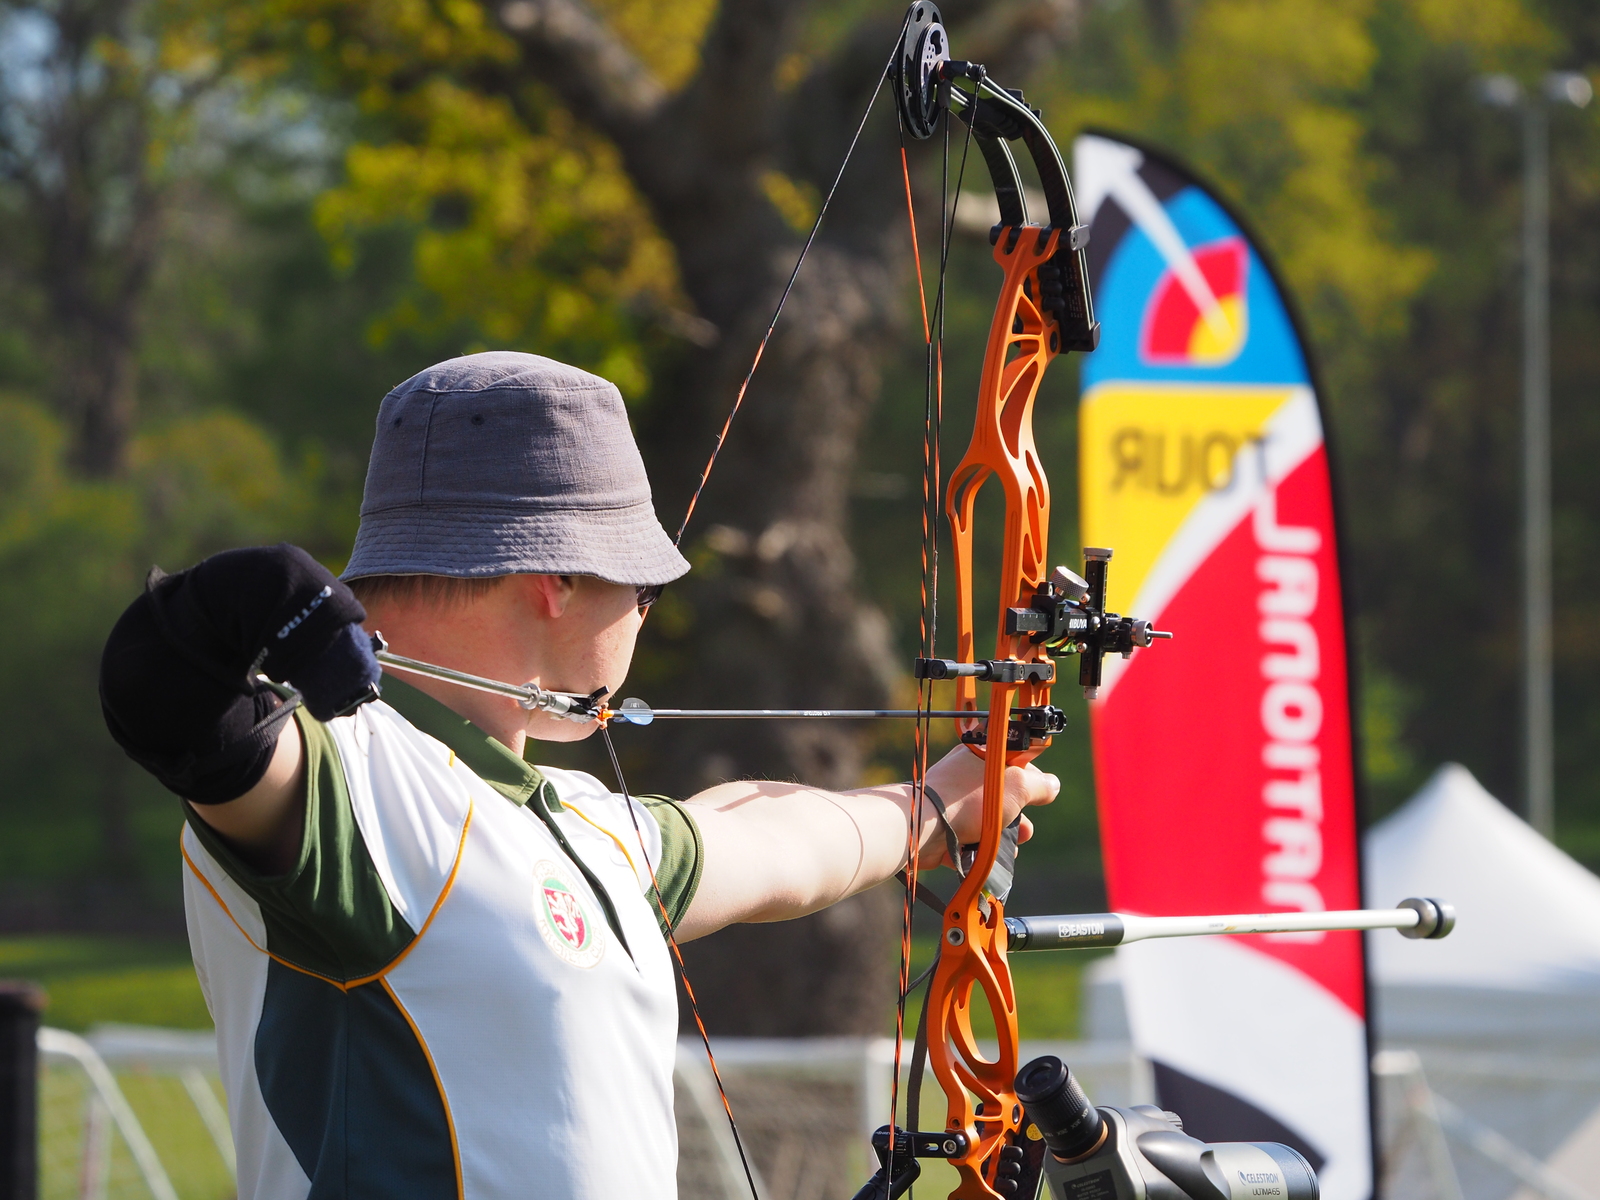 Archer at the National Tour